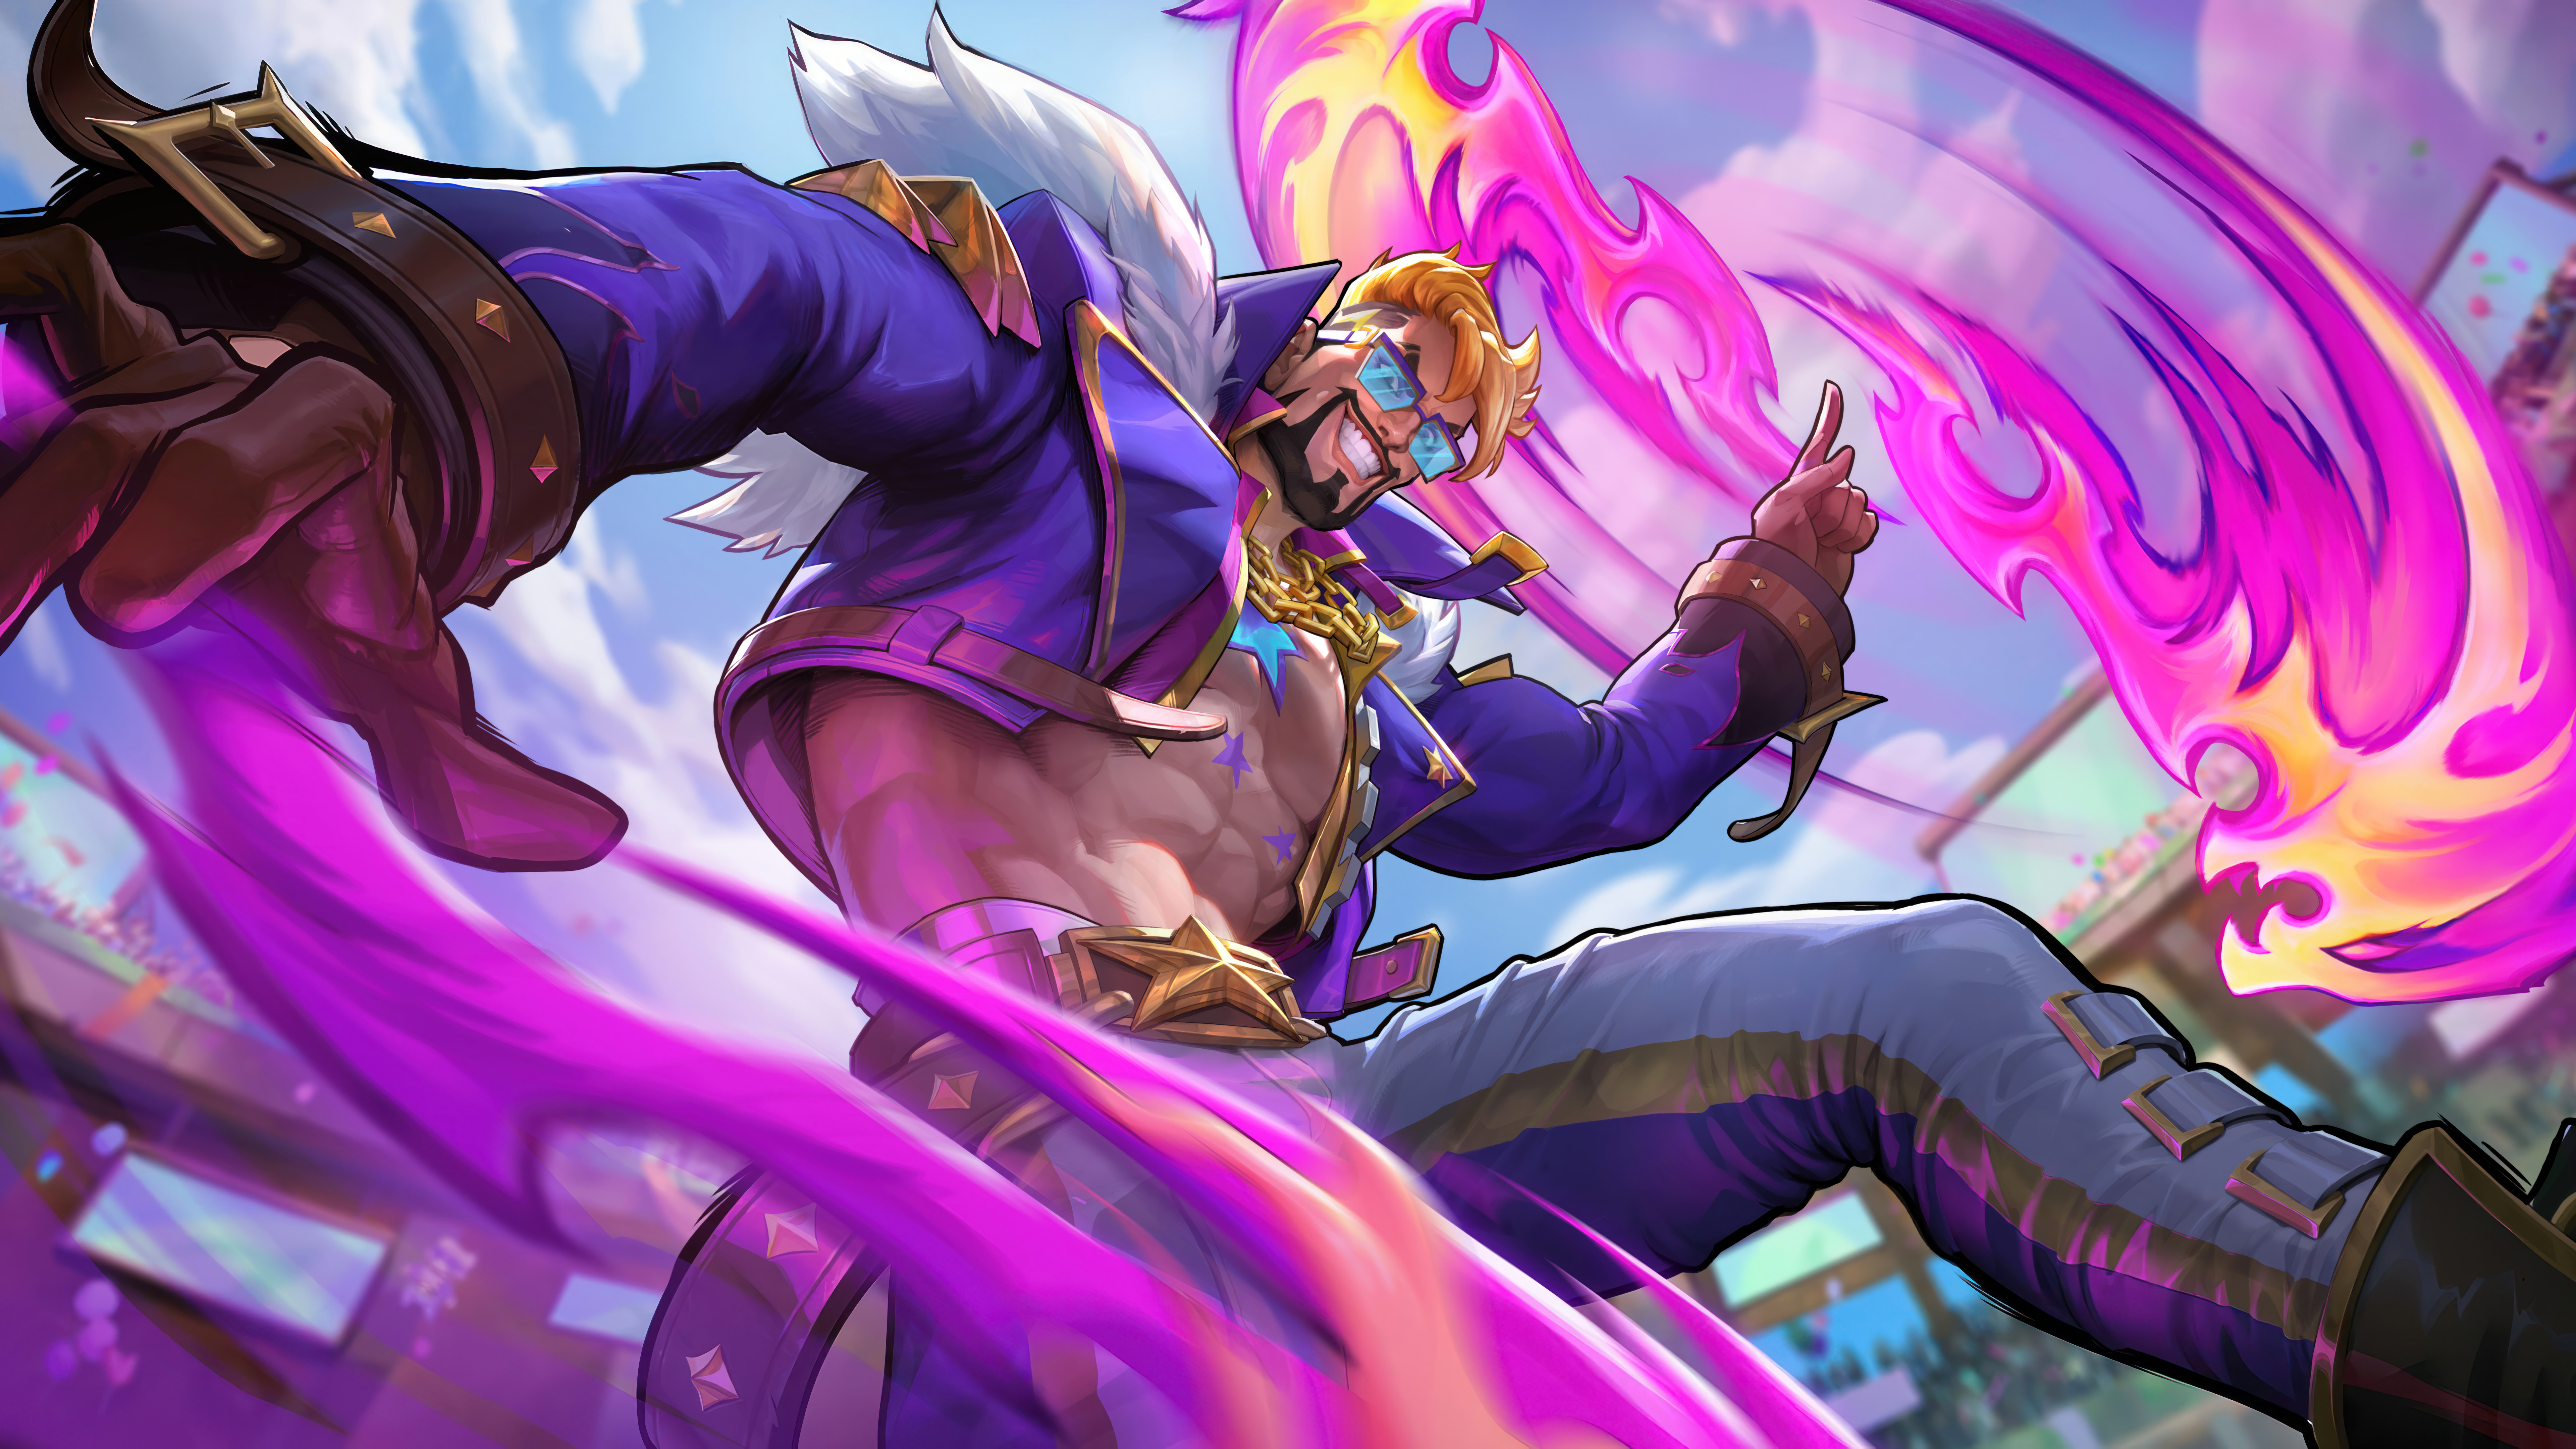 General 7680x4320 League of Legends: Wild Rift League of Legends digital art Riot Games 4K GZG video games Draven (League of Legends) Adcarry video game art video game characters glasses beard weapon sky clouds looking at viewer Soul Fighter (League of Legends)